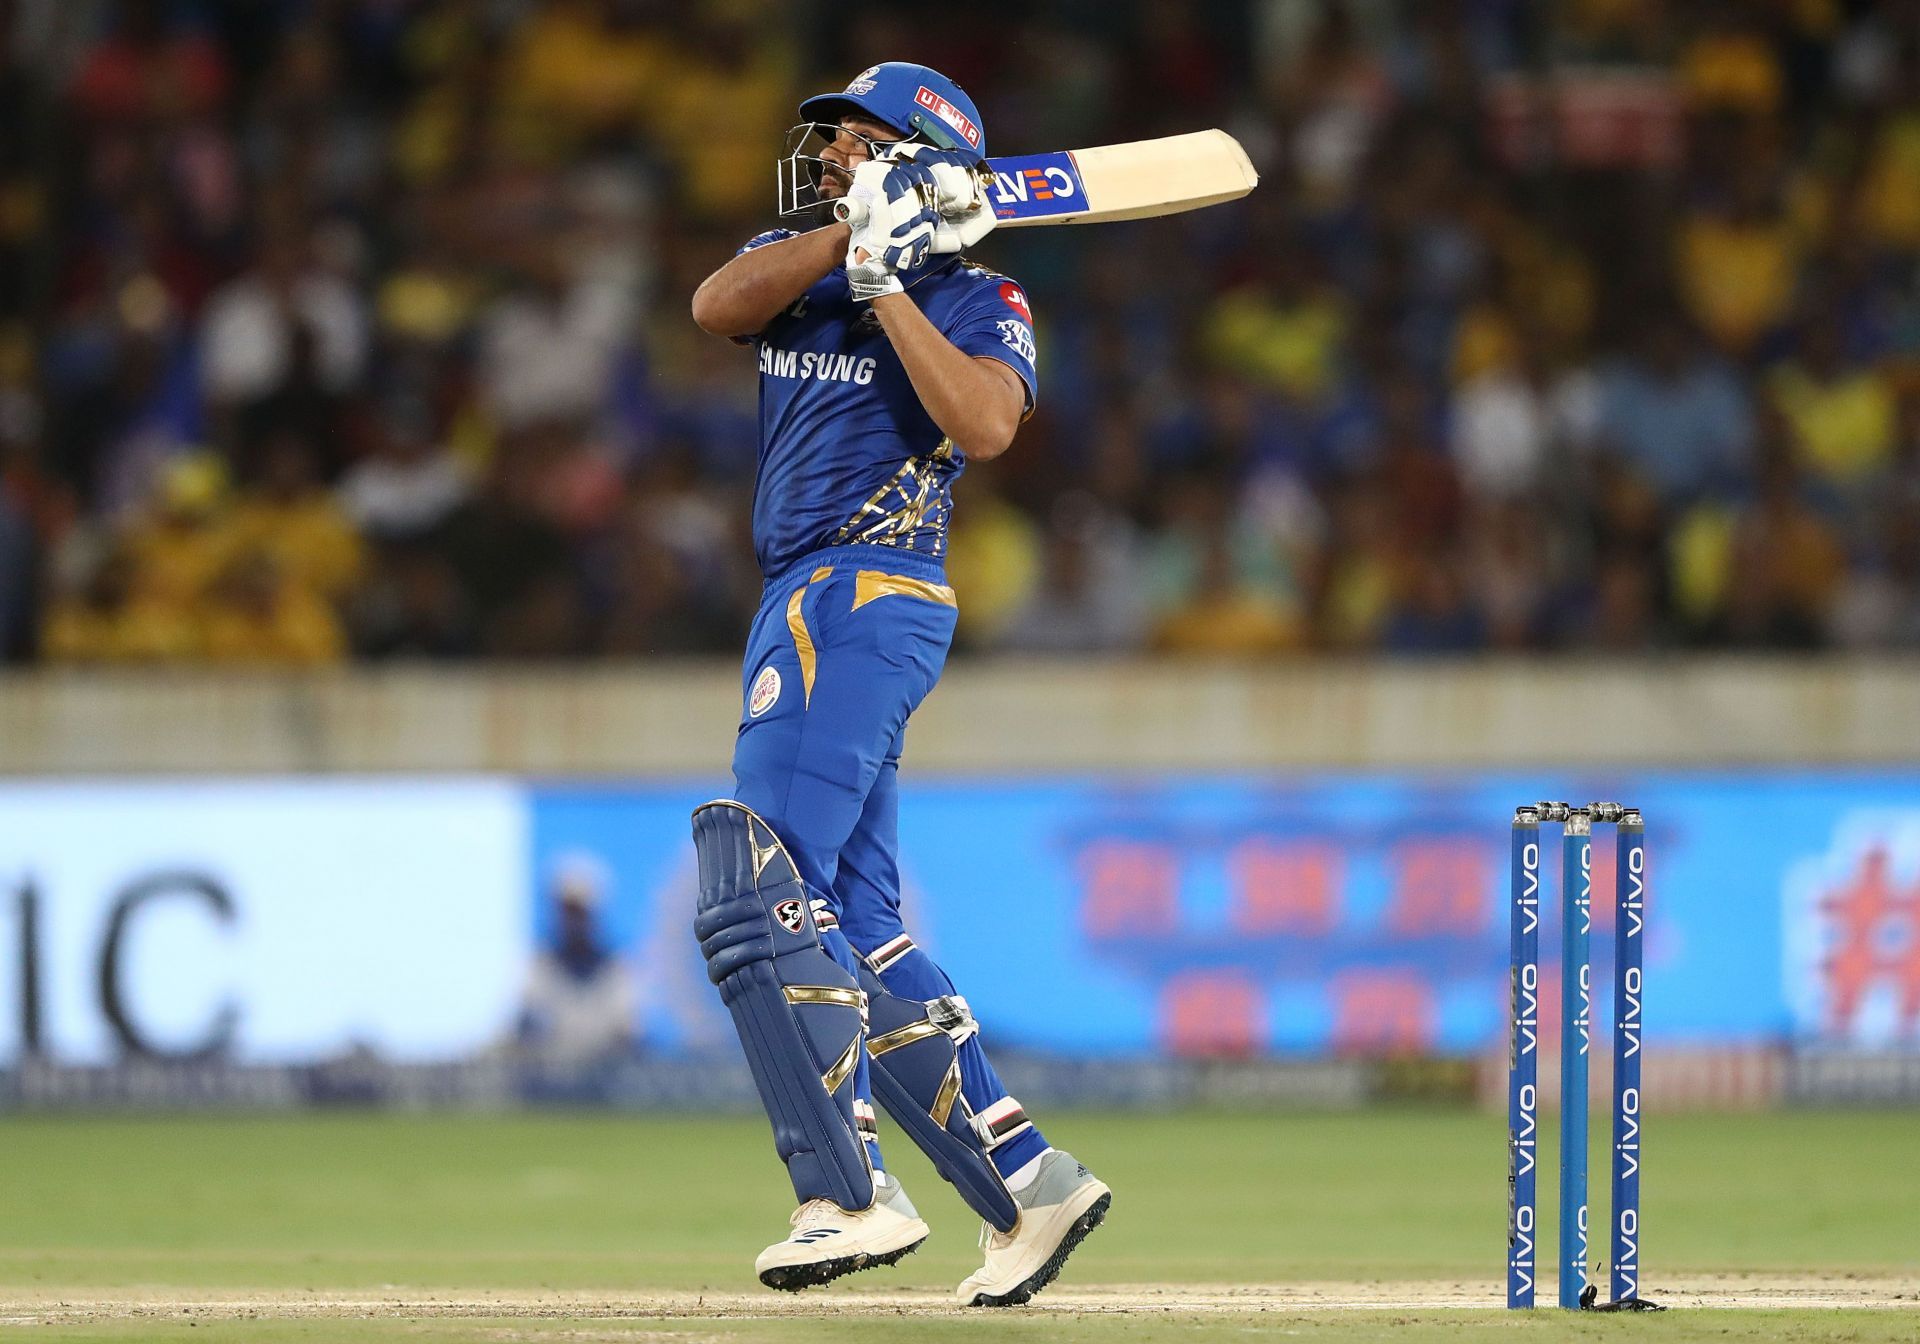 Rohit Sharma is one of the top run-scorers in IPL